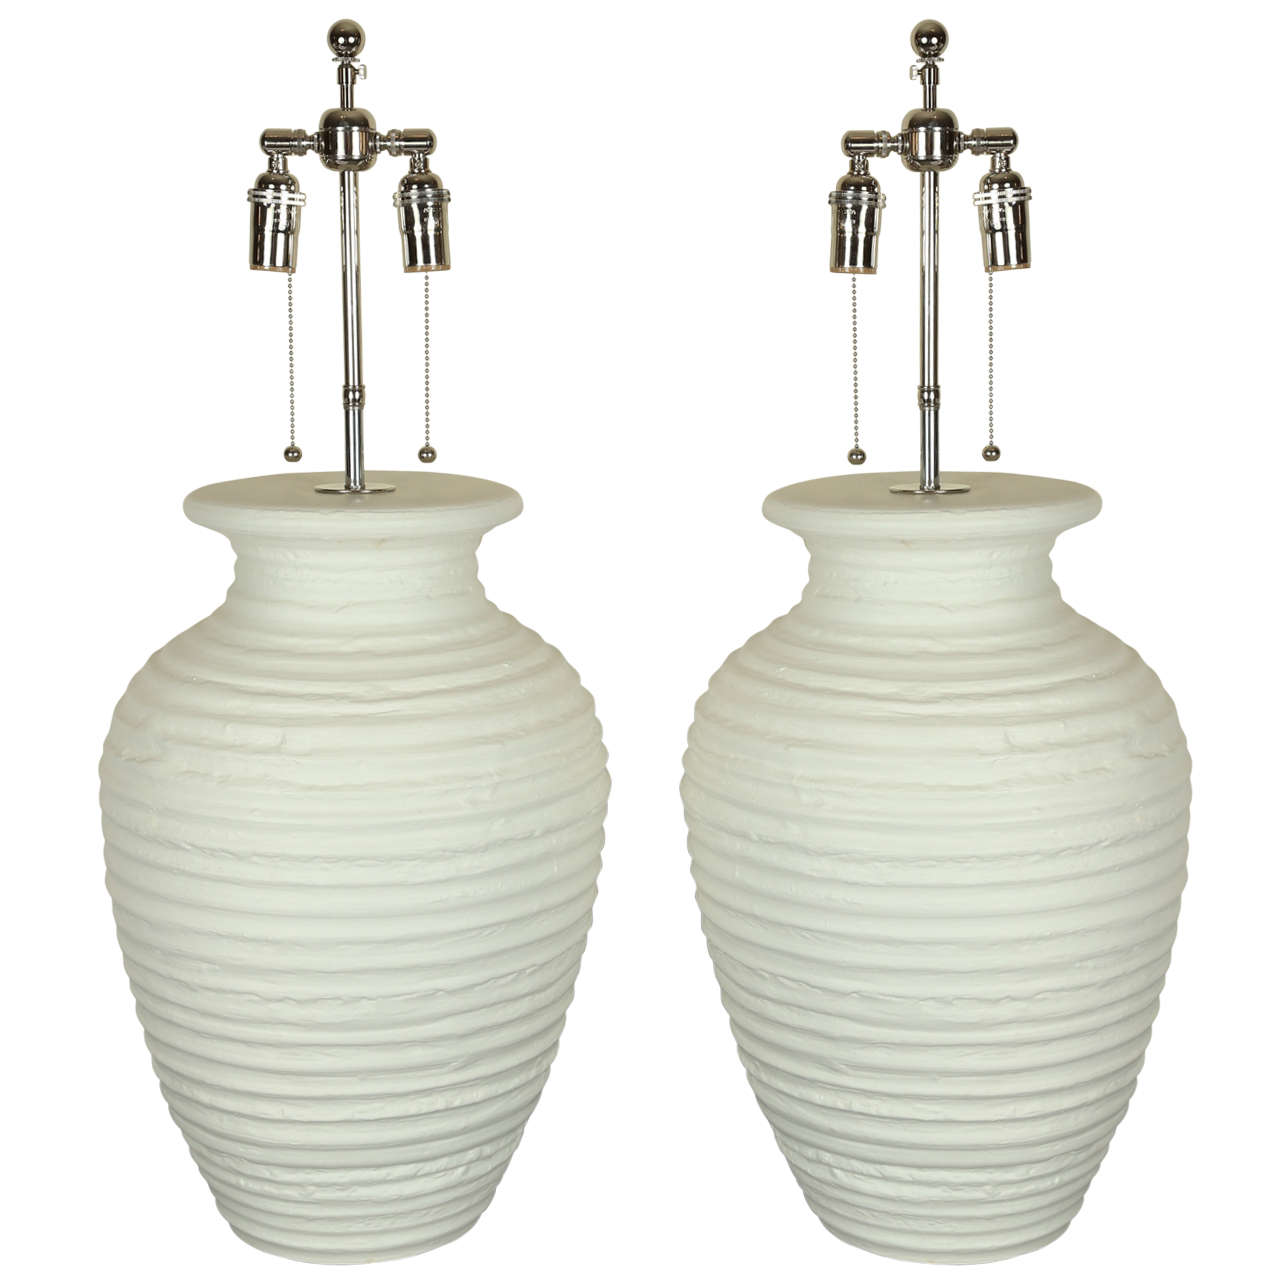 Large Pair of Urn Shaped Ceramic Table Lamps with a Matte White Finish